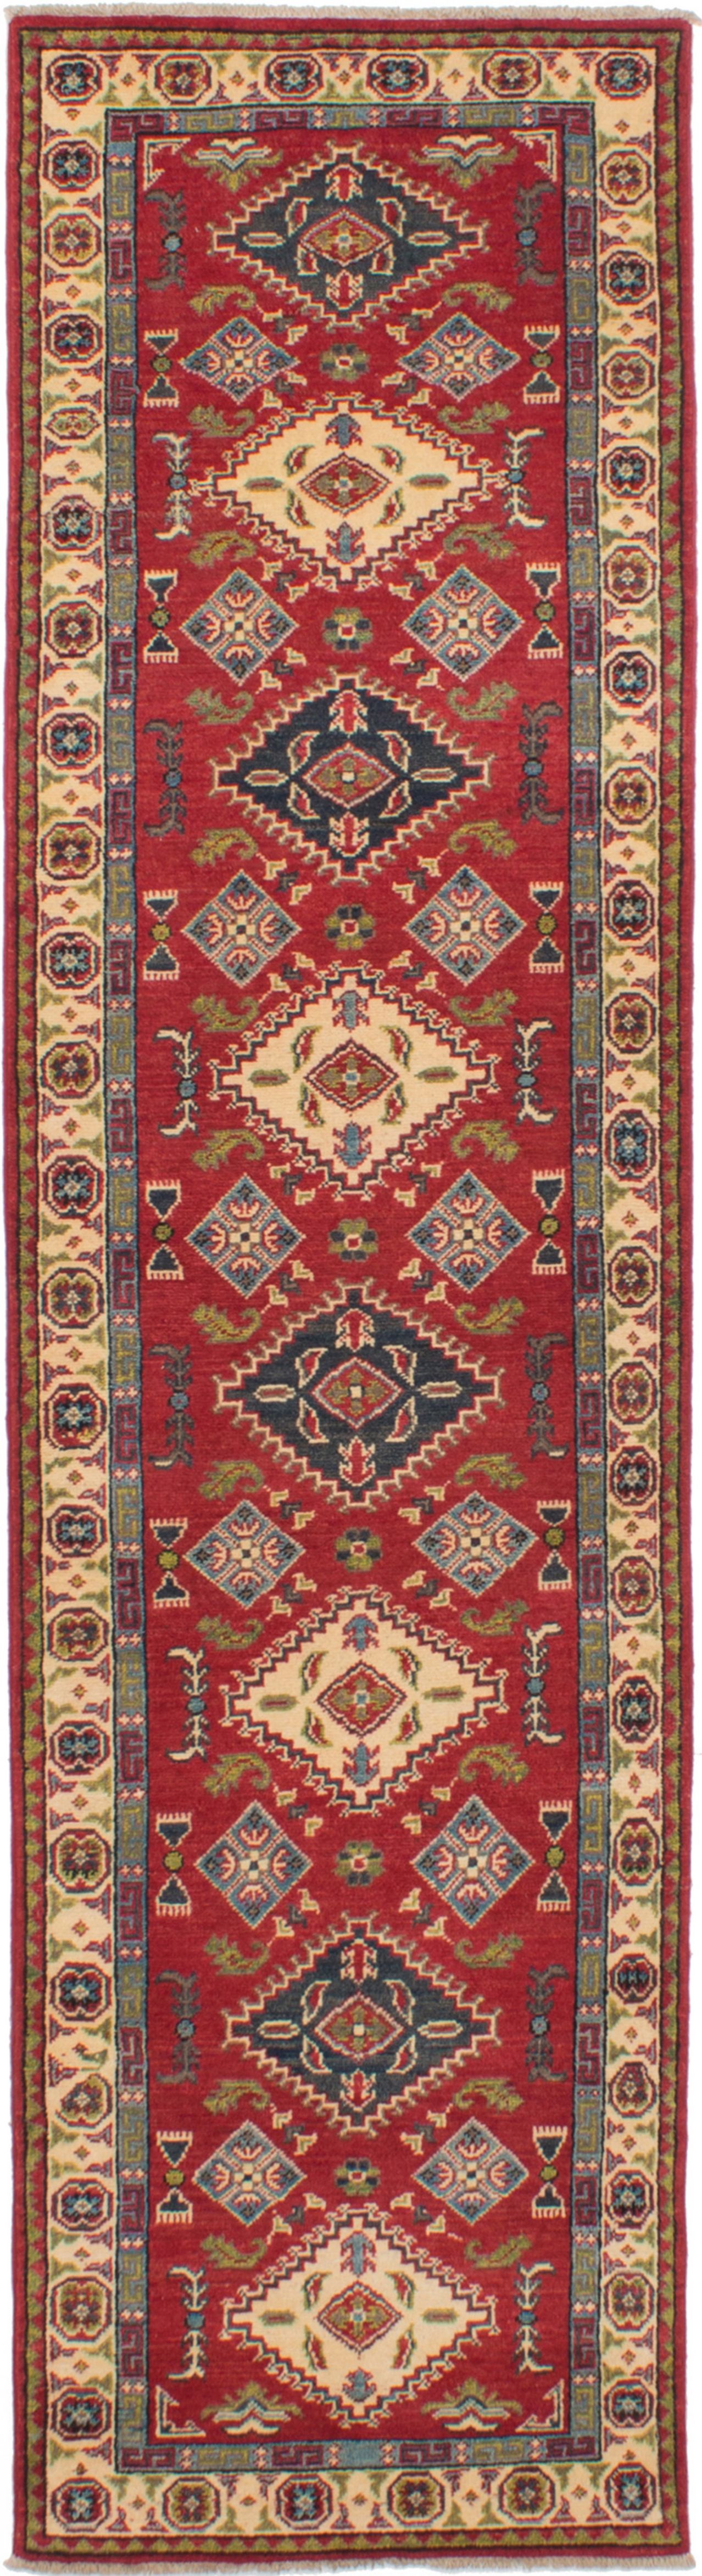 Hand-knotted Finest Gazni Red Wool Rug 2'7" x 10'0"  Size: 2'7" x 10'0"  